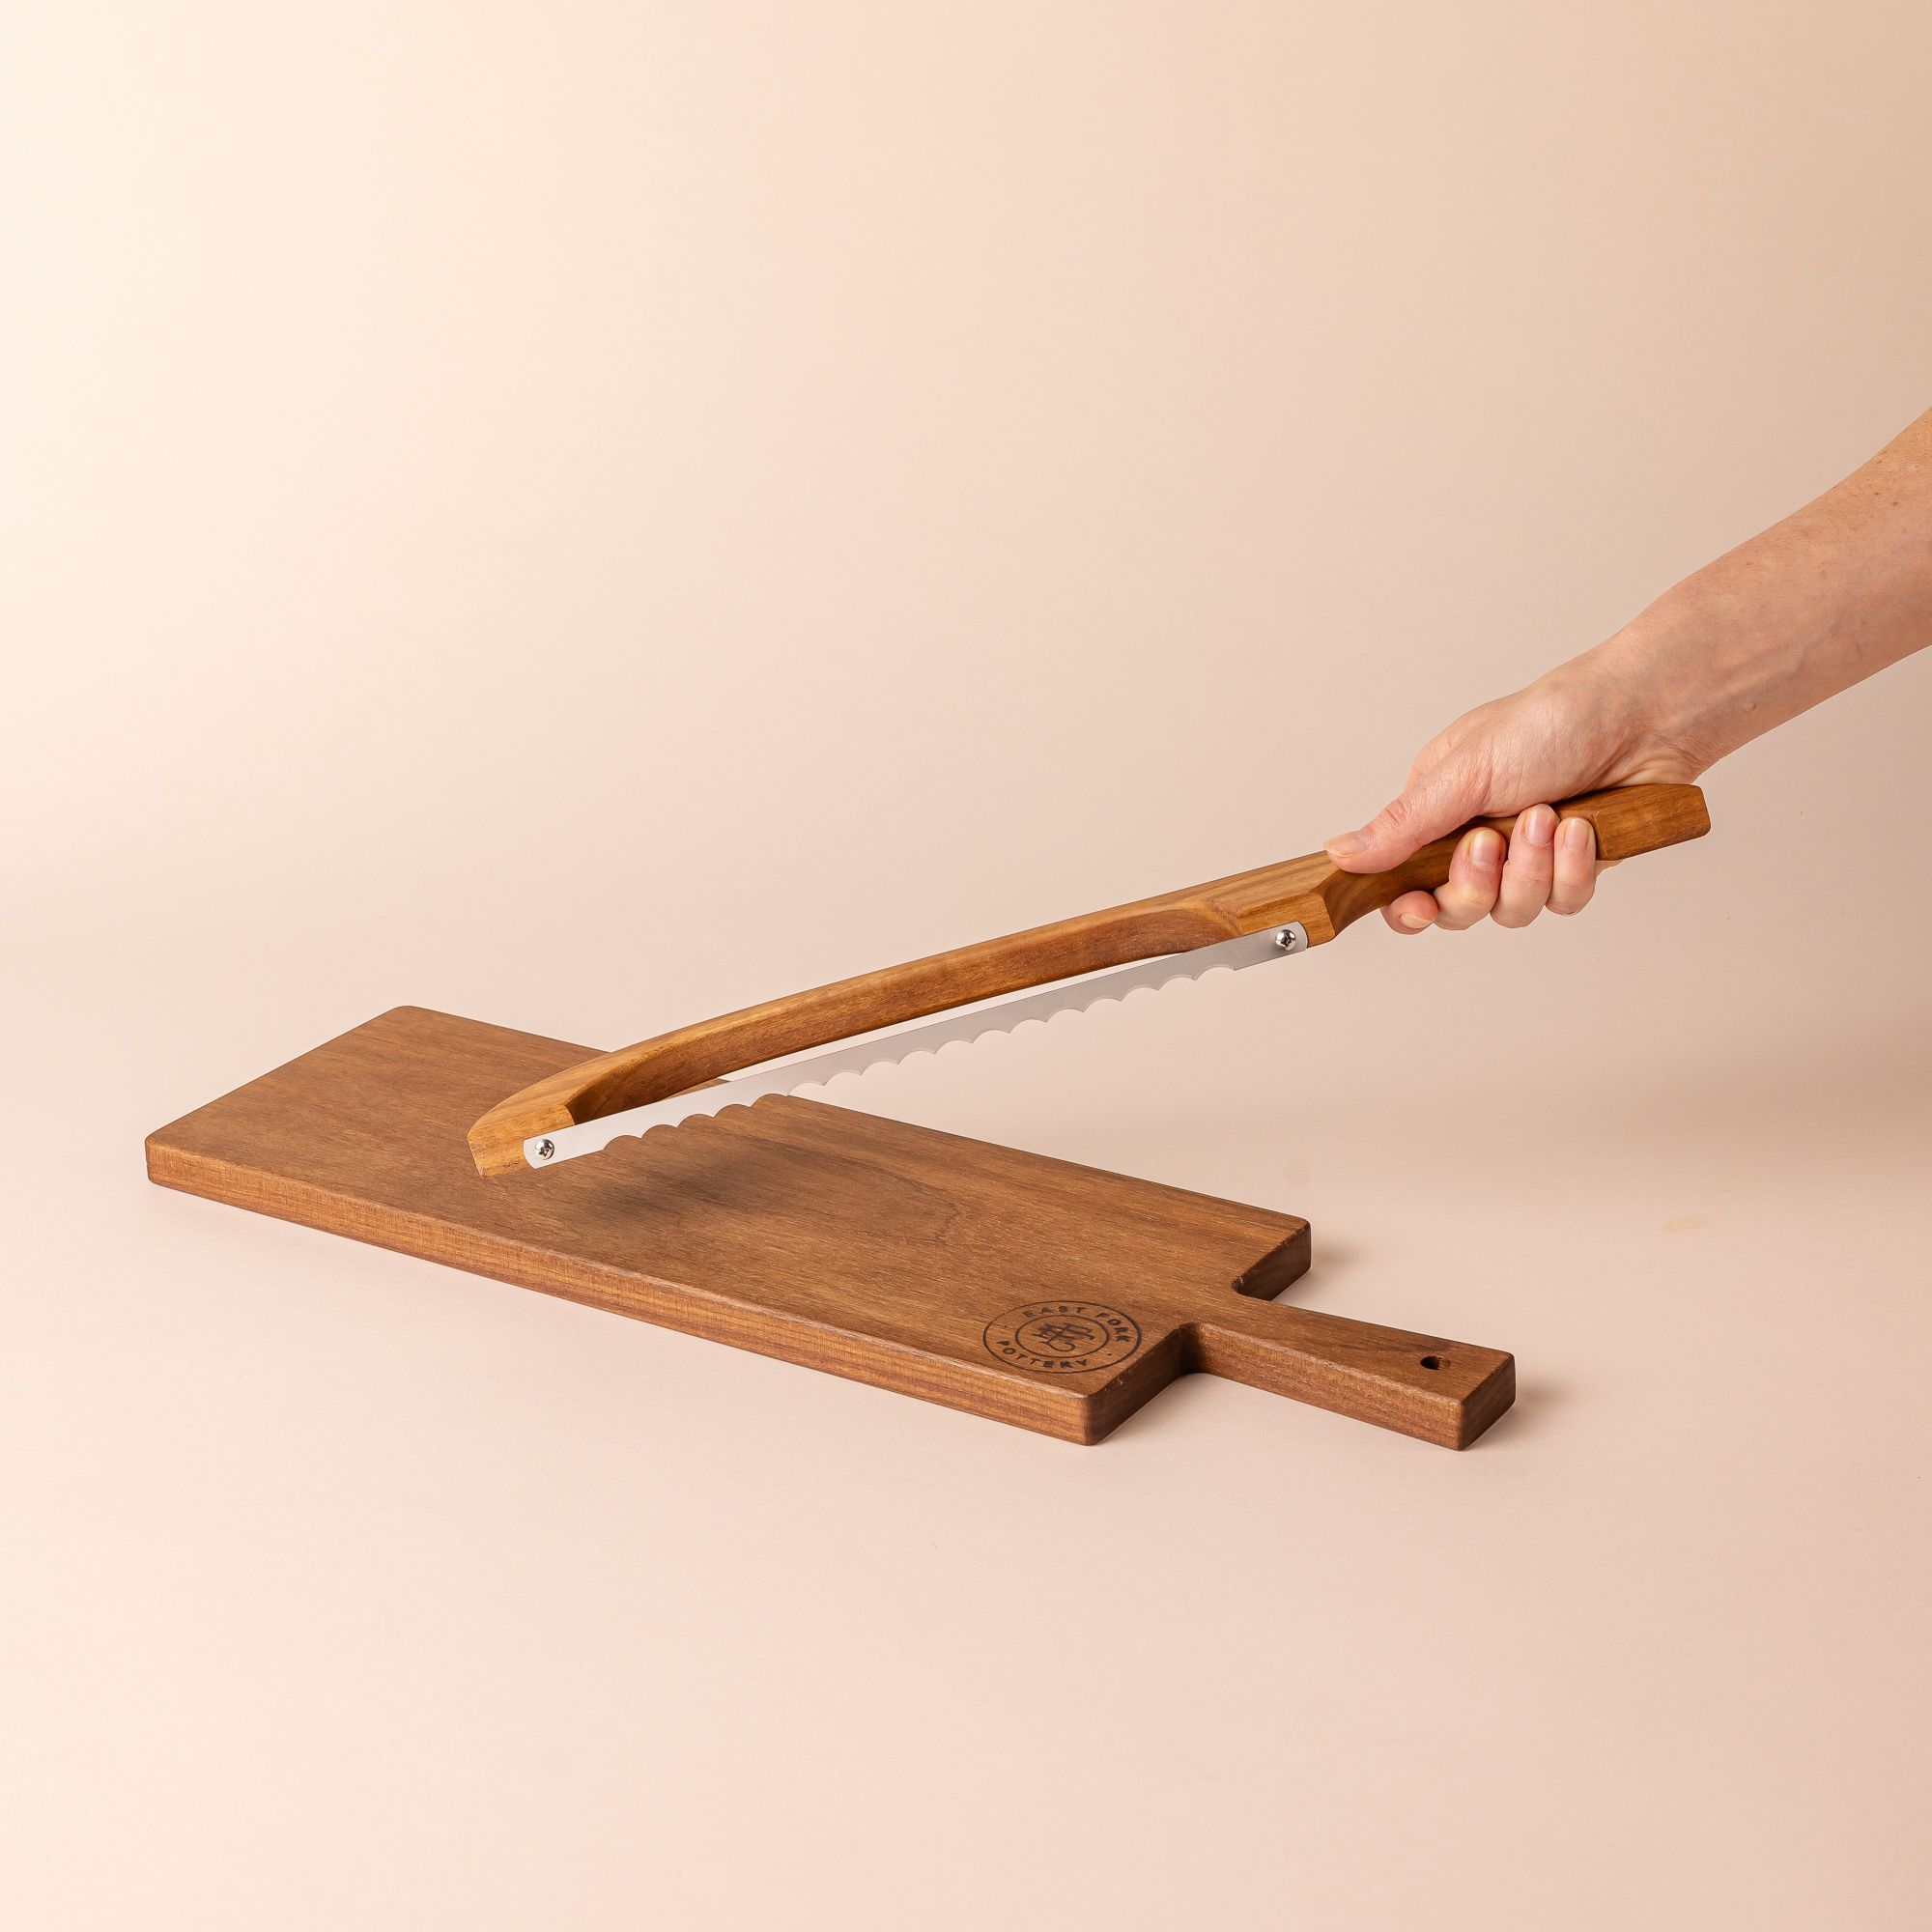 A wood rectangle bread board with an "East Fork Pottery" stamp on the corner and a handle. A hand holds a matching wood bread bow above it.